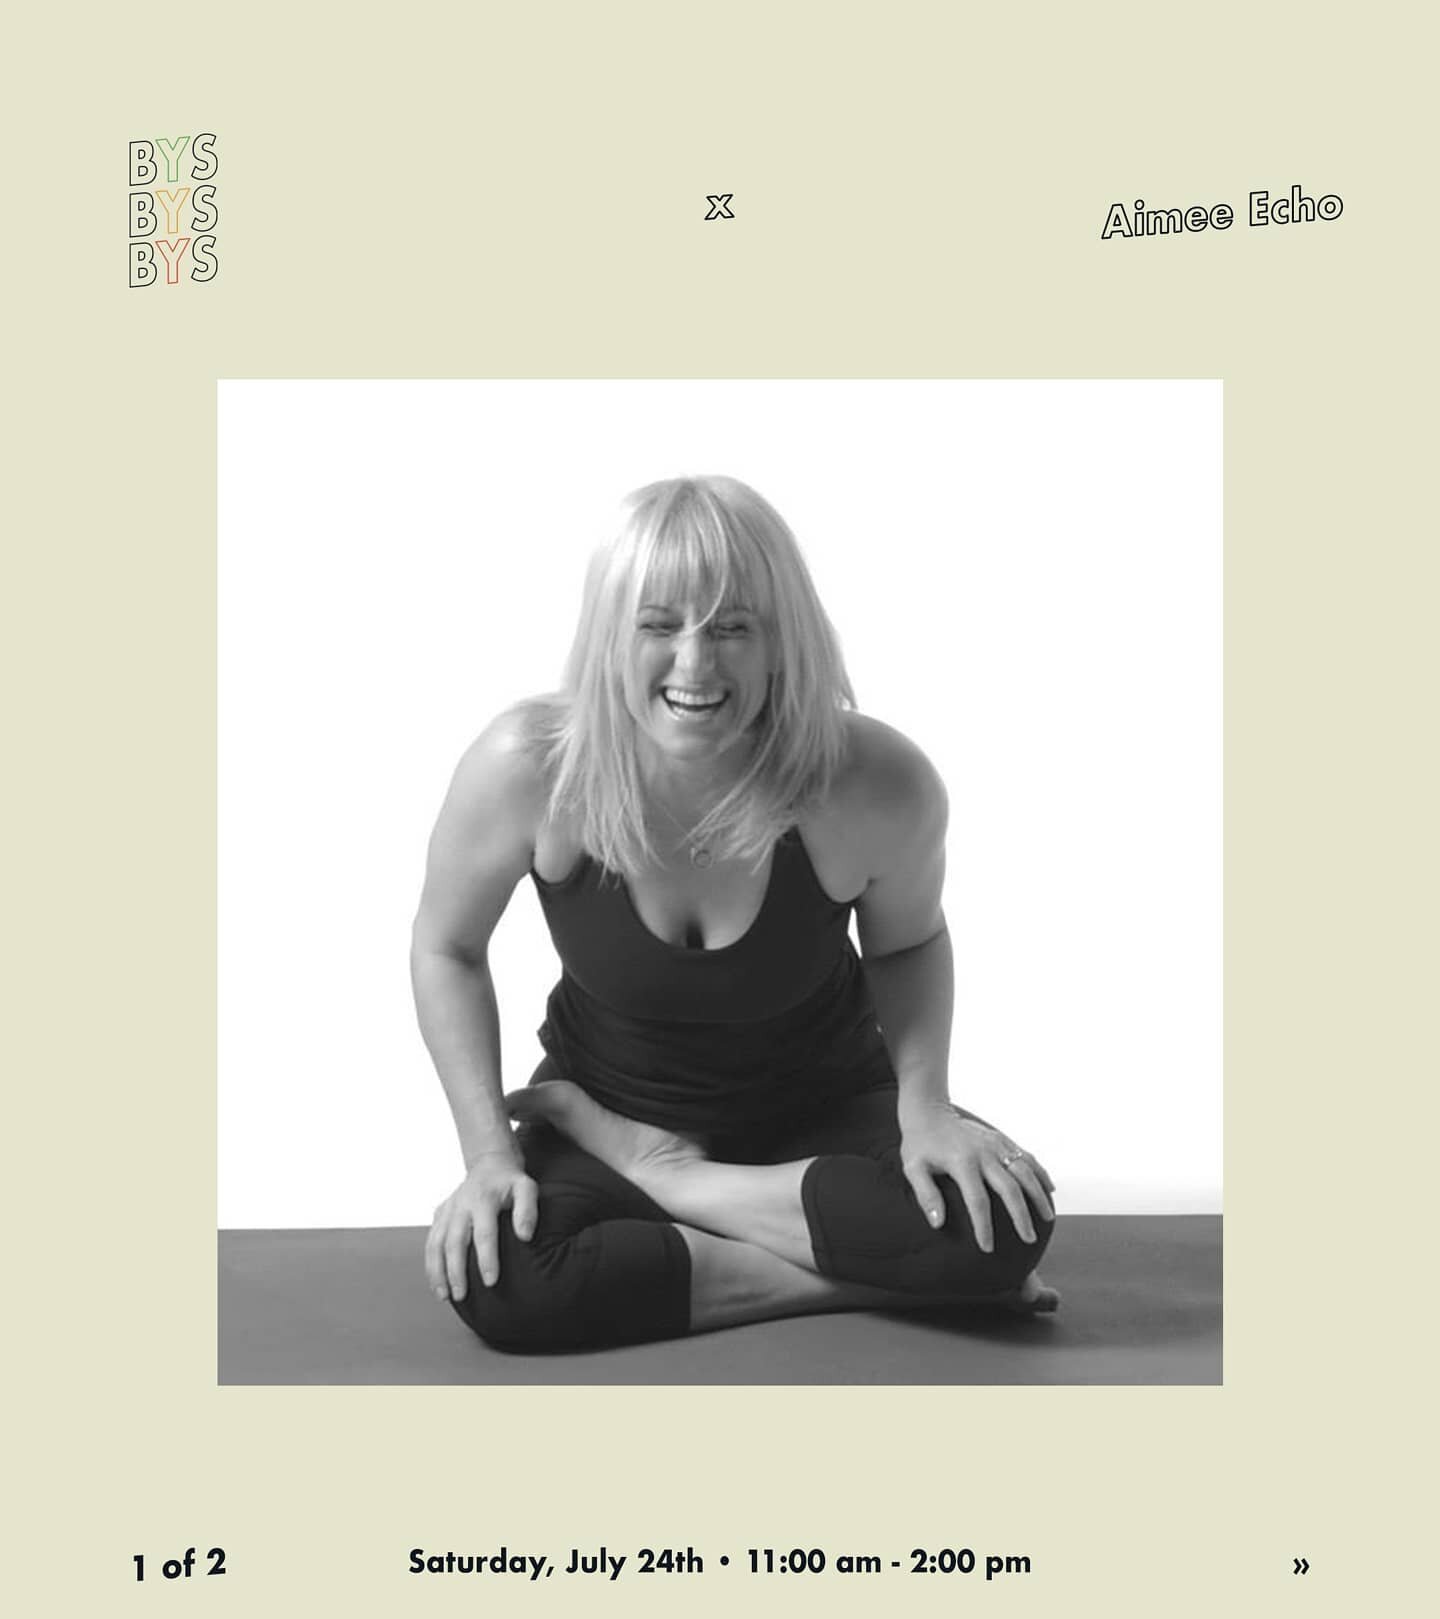 We are thrilled to announce our first workshop &quot;A Practical Overview of Pantanjali's Yoga Sutras&quot; w/ @aimeeecho

Aimee is the owner of Ashtanga Yoga Long Beach, a devout student of Sutra studies, and a literal rock star. 

Learn how this se